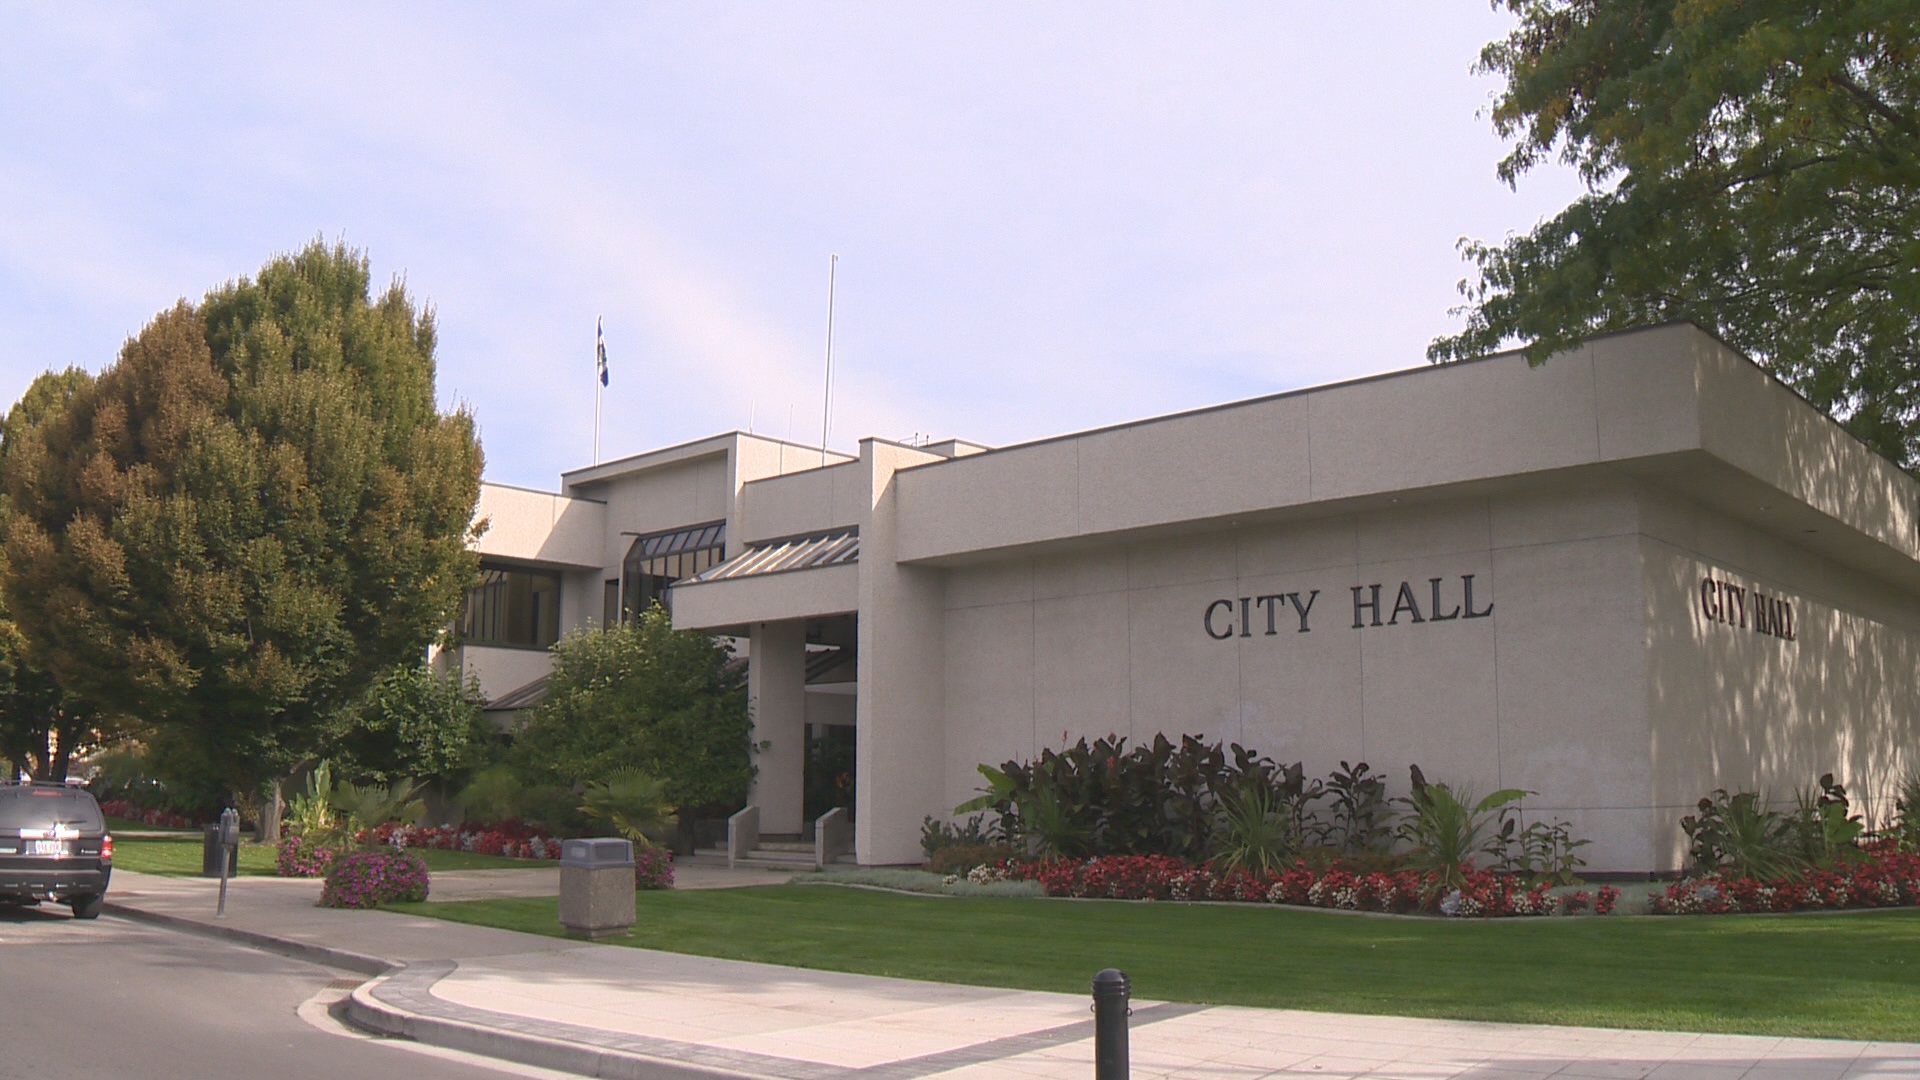 Crime reduction among recommendations from mayor’s task force in Kelowna